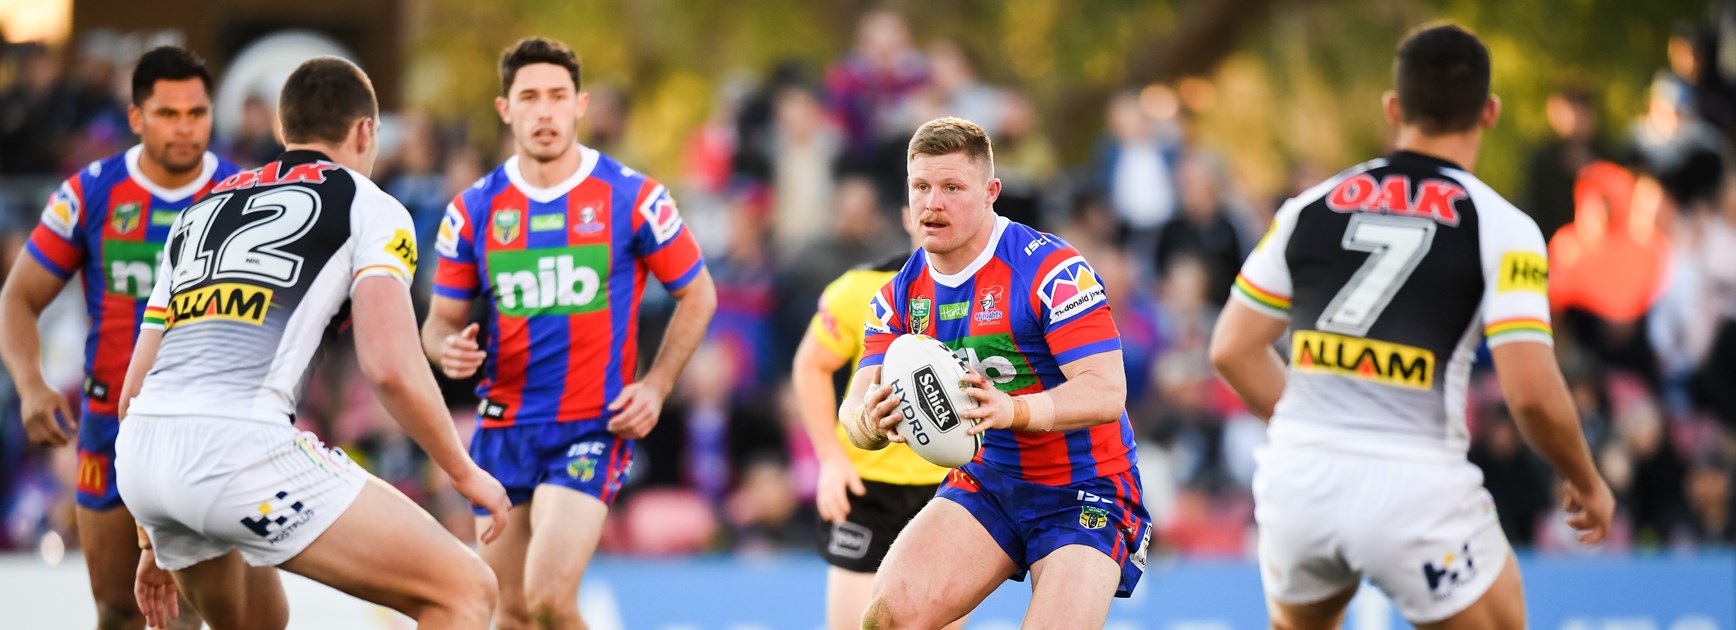 New homes for ex-Knights forwards